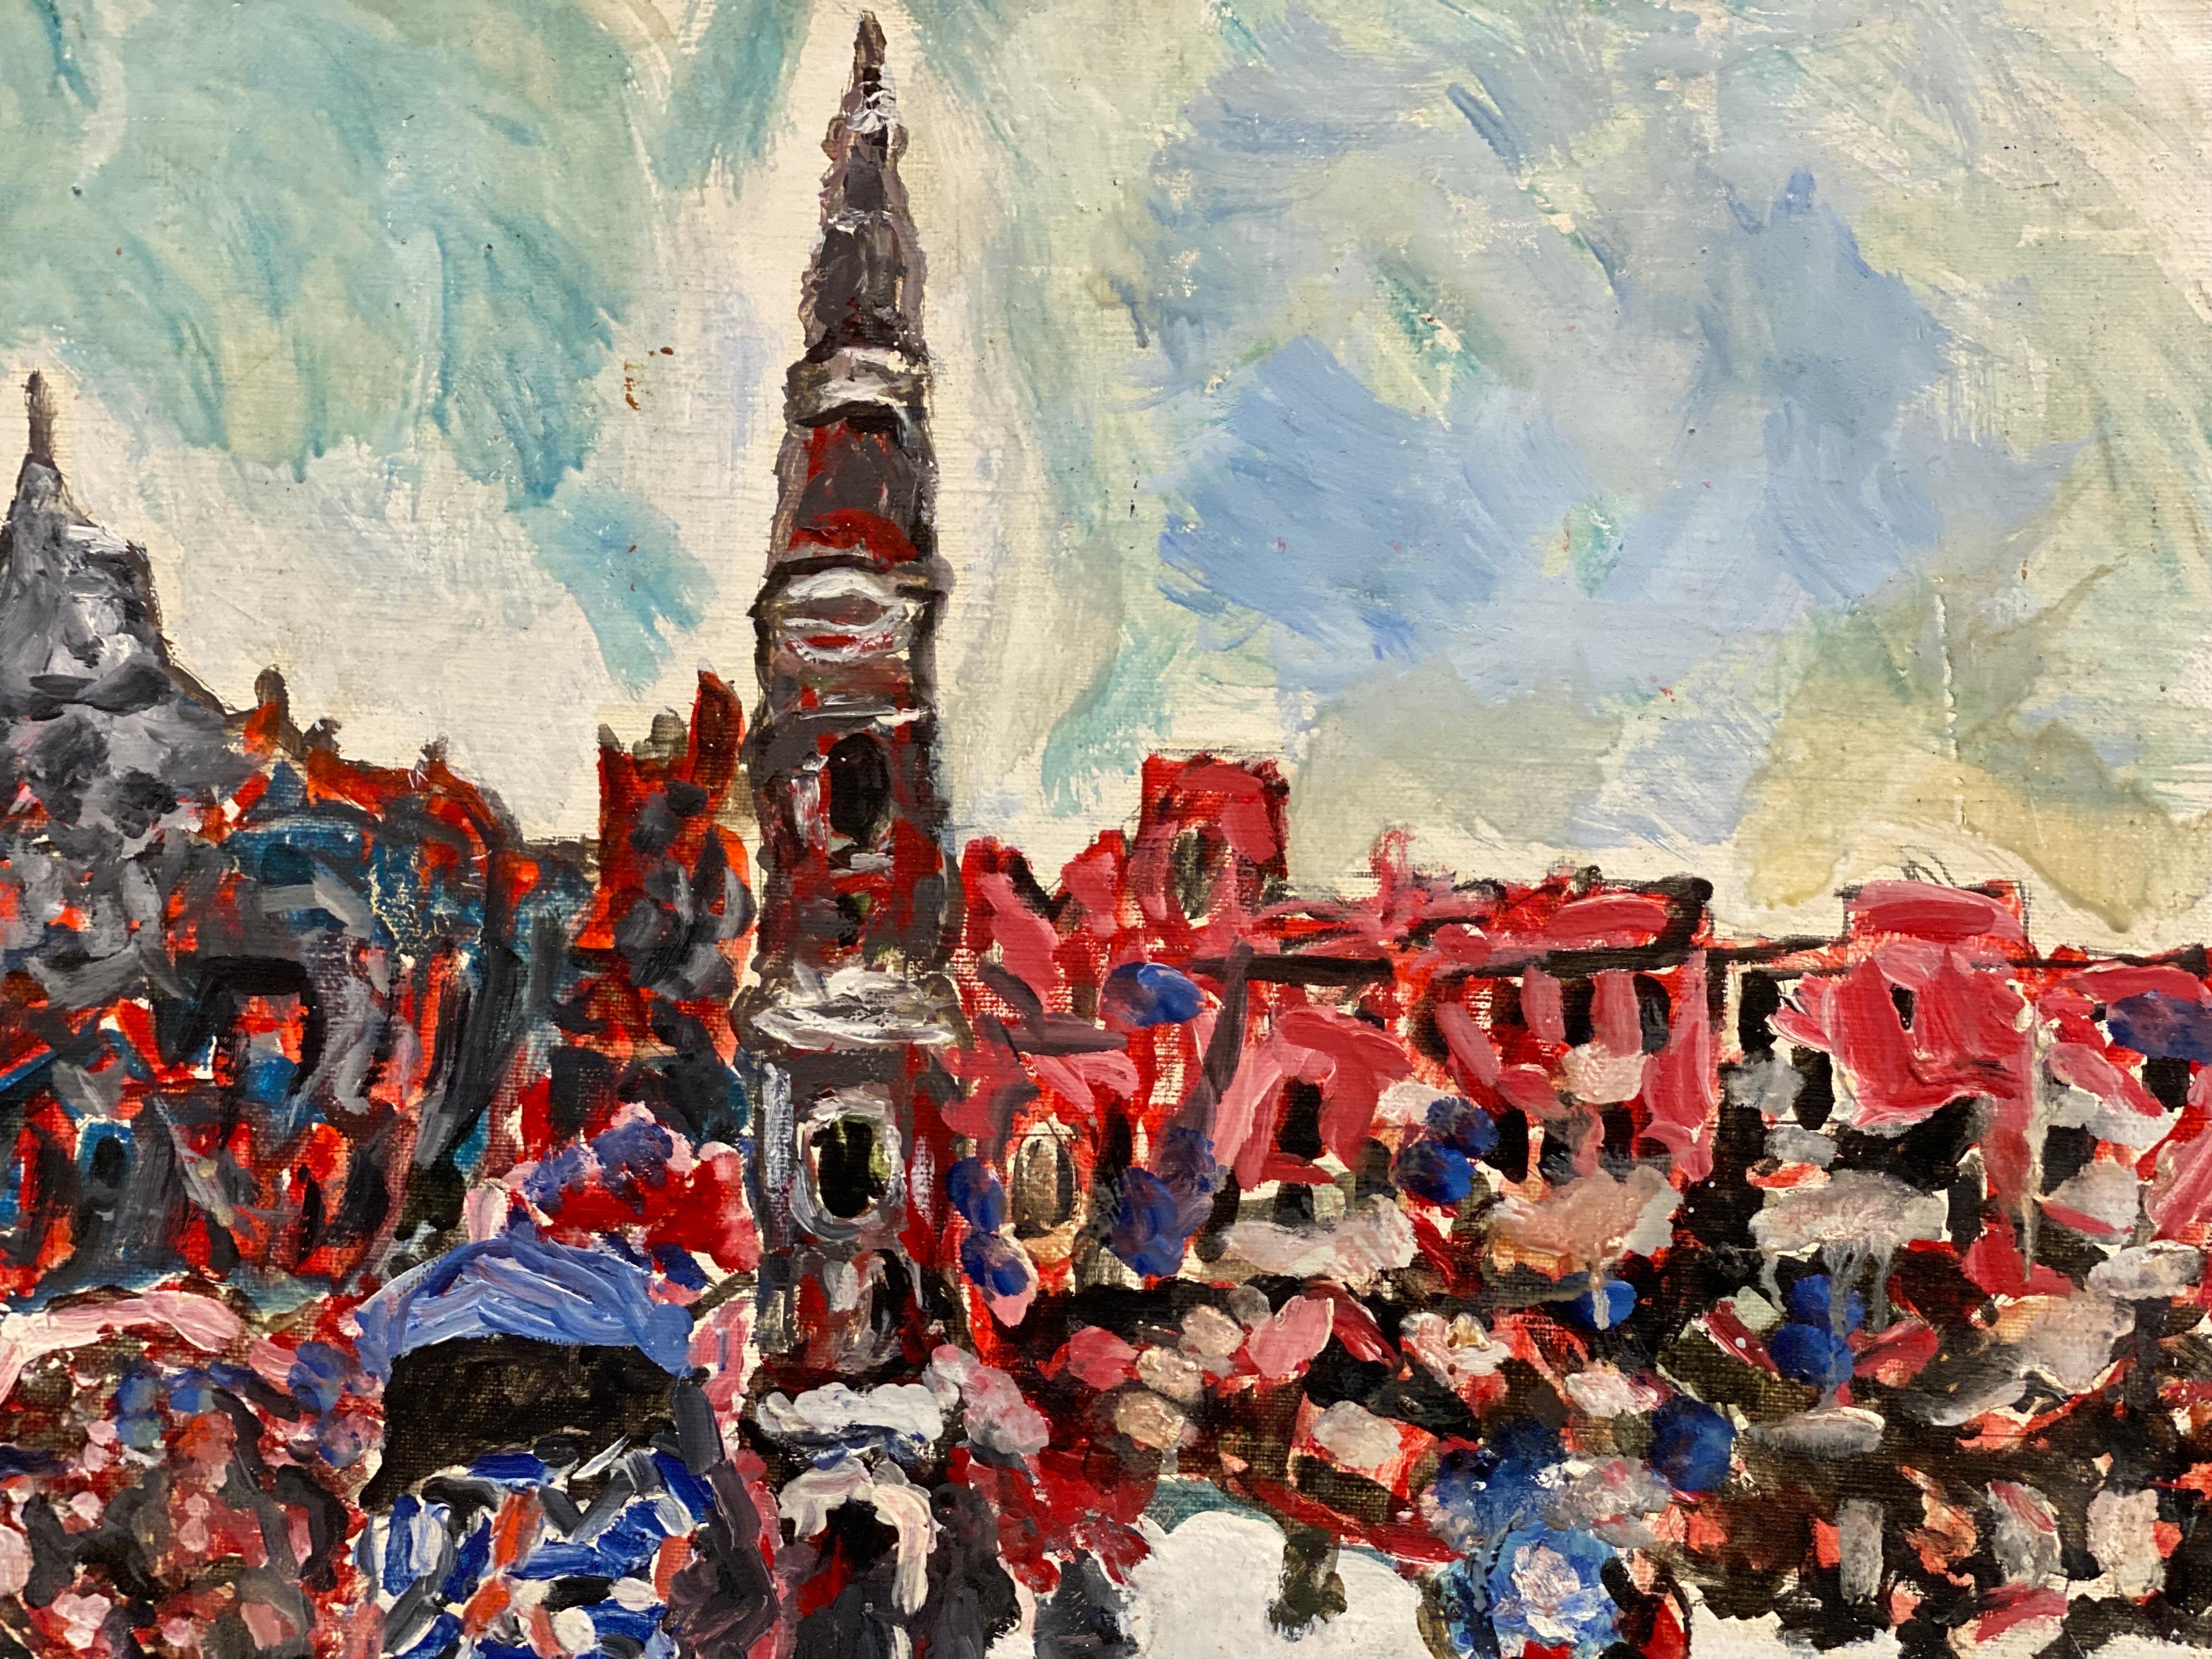 Artist/ School: French School, circa 1970's, expressionist/ fauvist style. 

Title: Busy city street/ square scene with figures

Medium: oil painting on canvas, unframed 

canvas: 19.75 x 24 inches

Provenance: private collection, France

Condition: